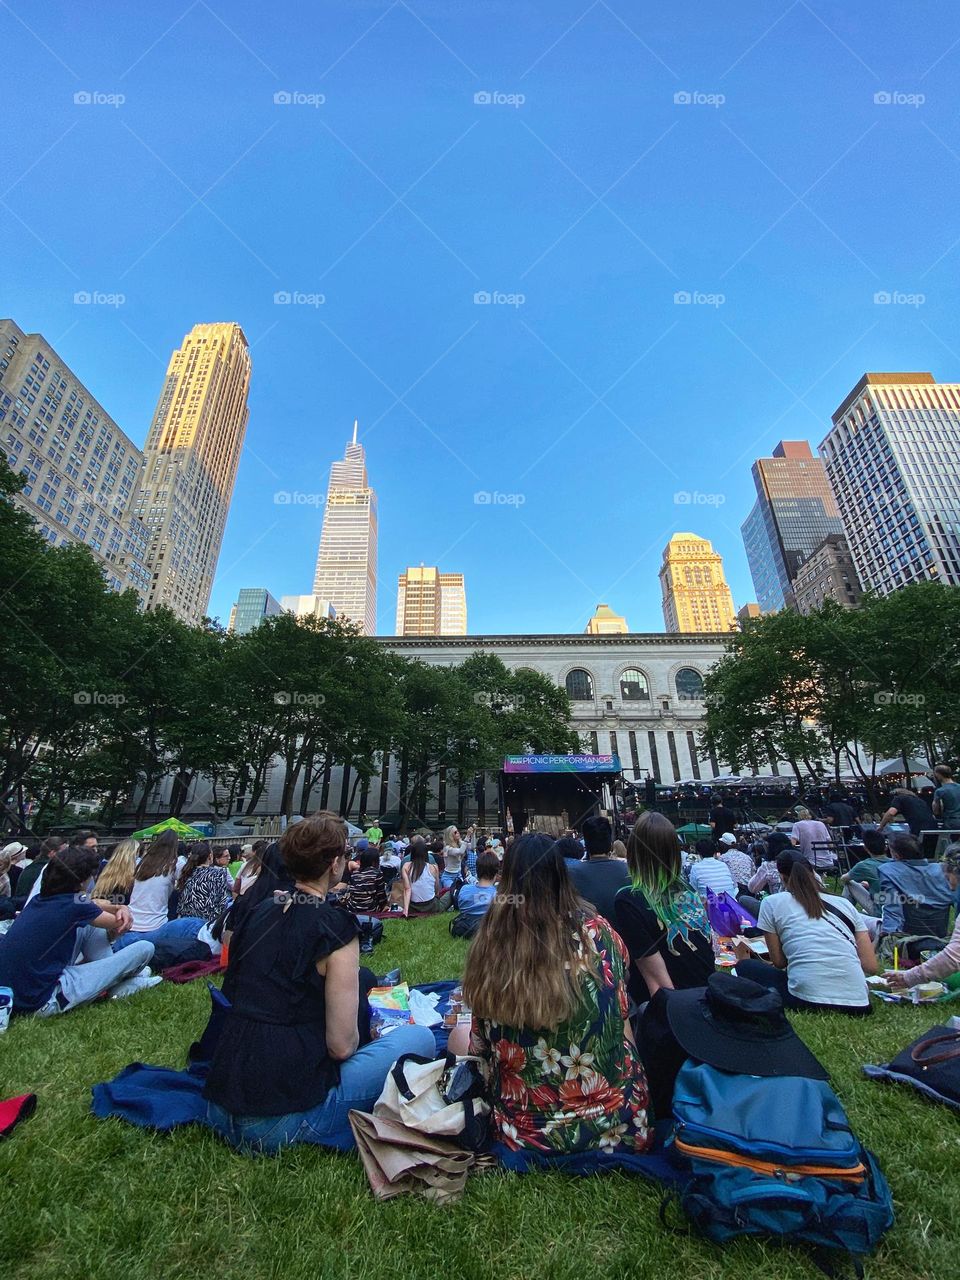 People watching and listening Opera and picnic at Bryant Park New York City.